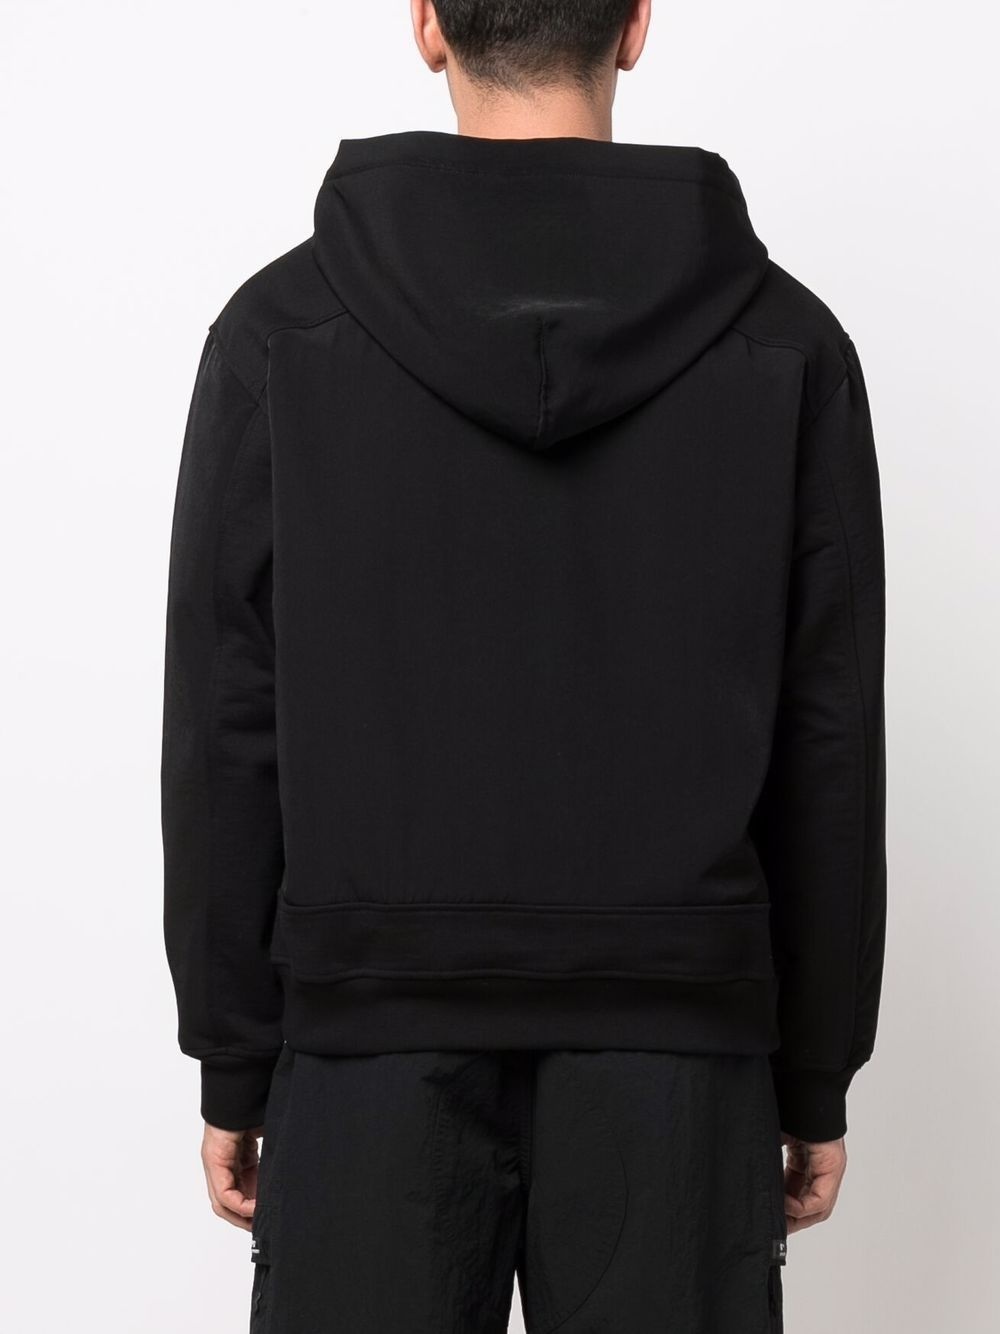 embroidered-logo zip-up hoodie - 5